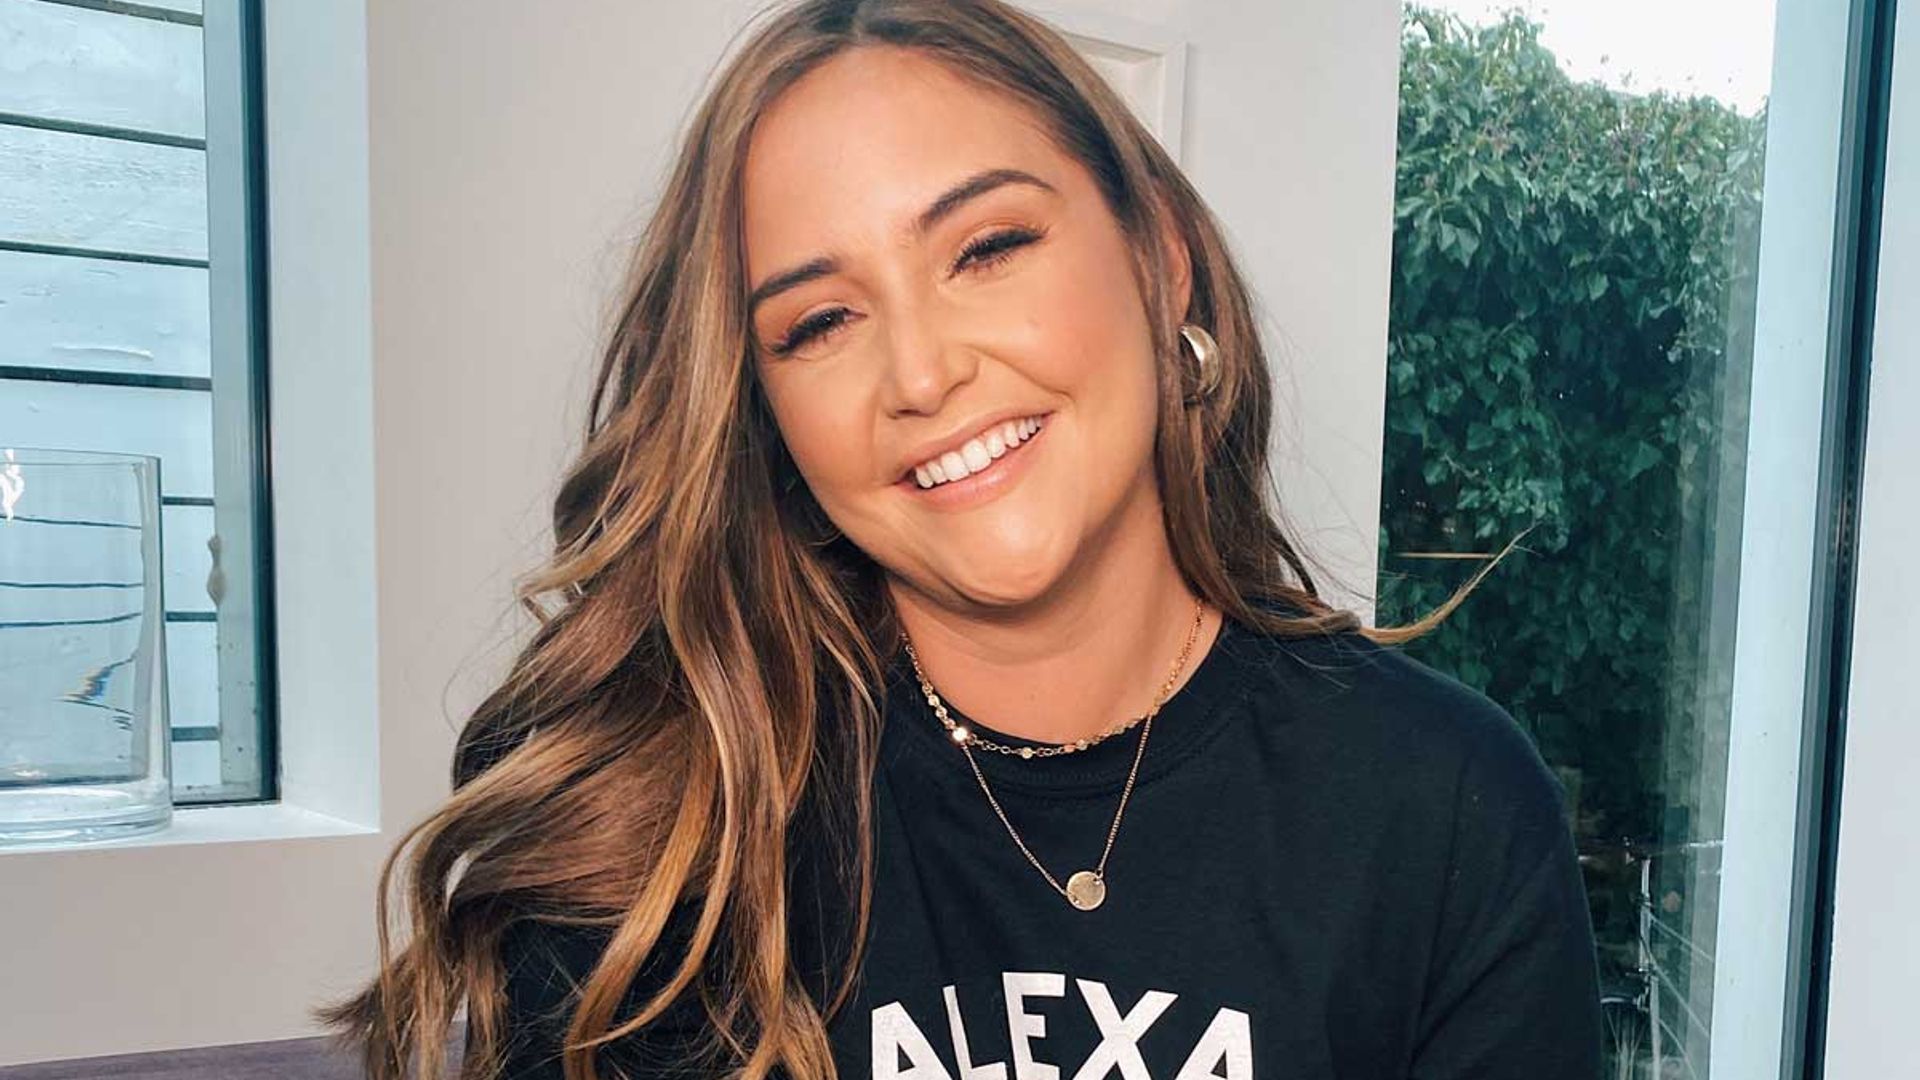 Jacqueline Jossa just wore the most relatable T-shirt for mums